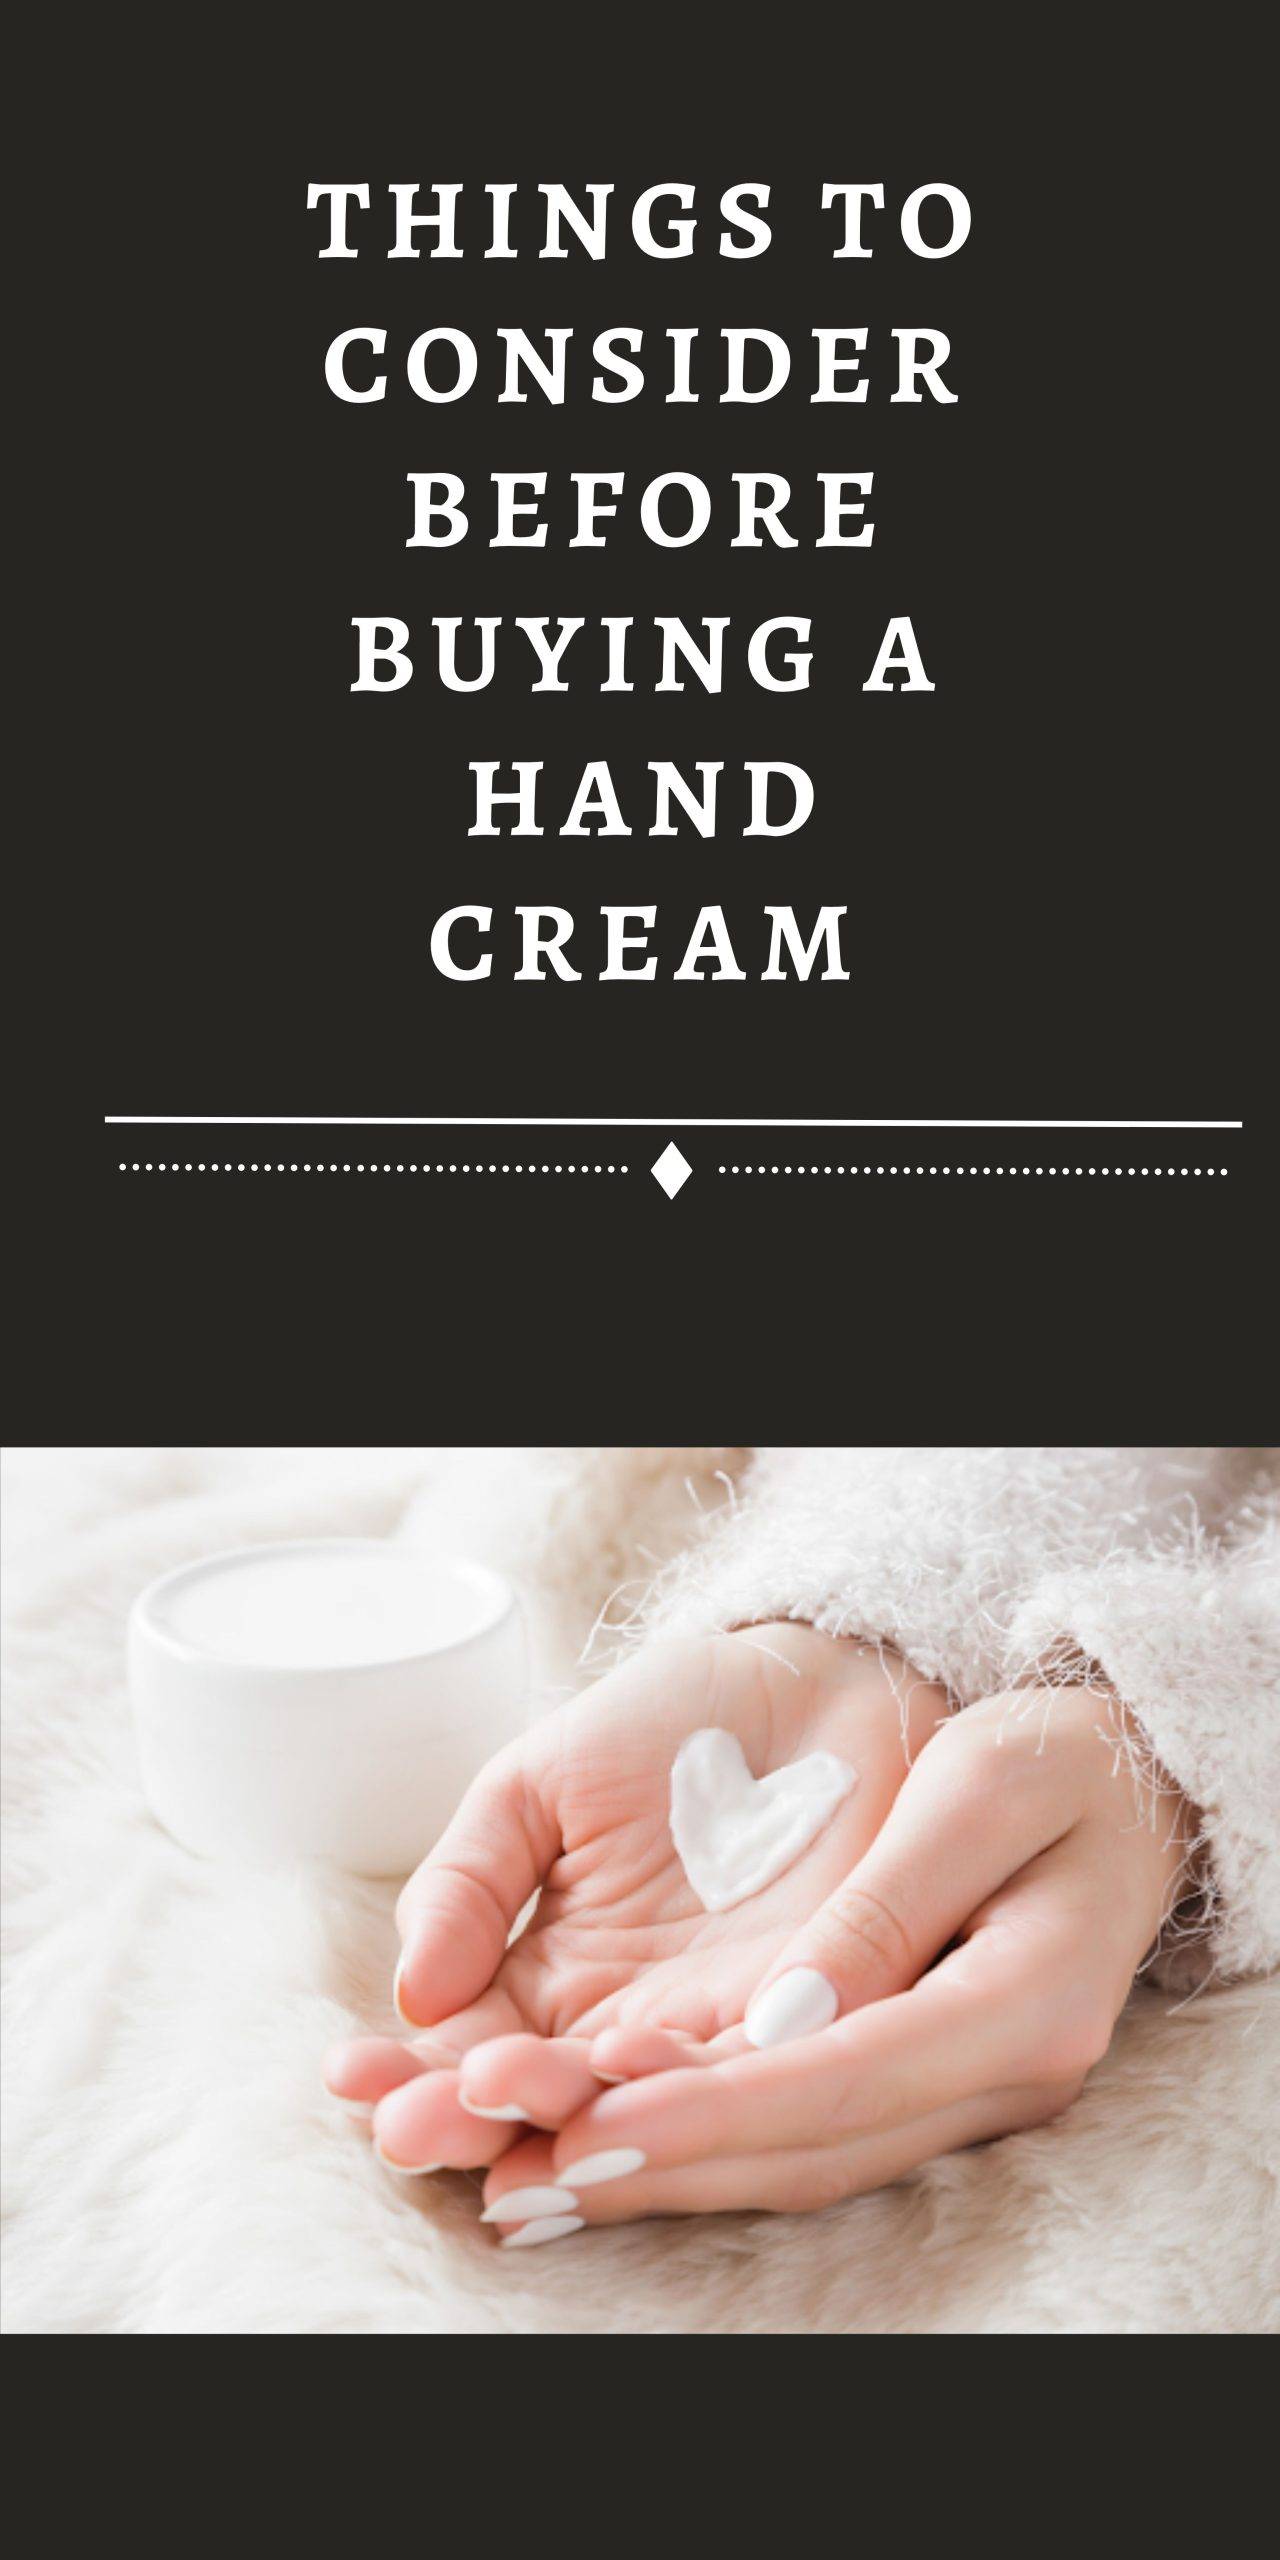 Things to Consider Before Buying a Hand Cream